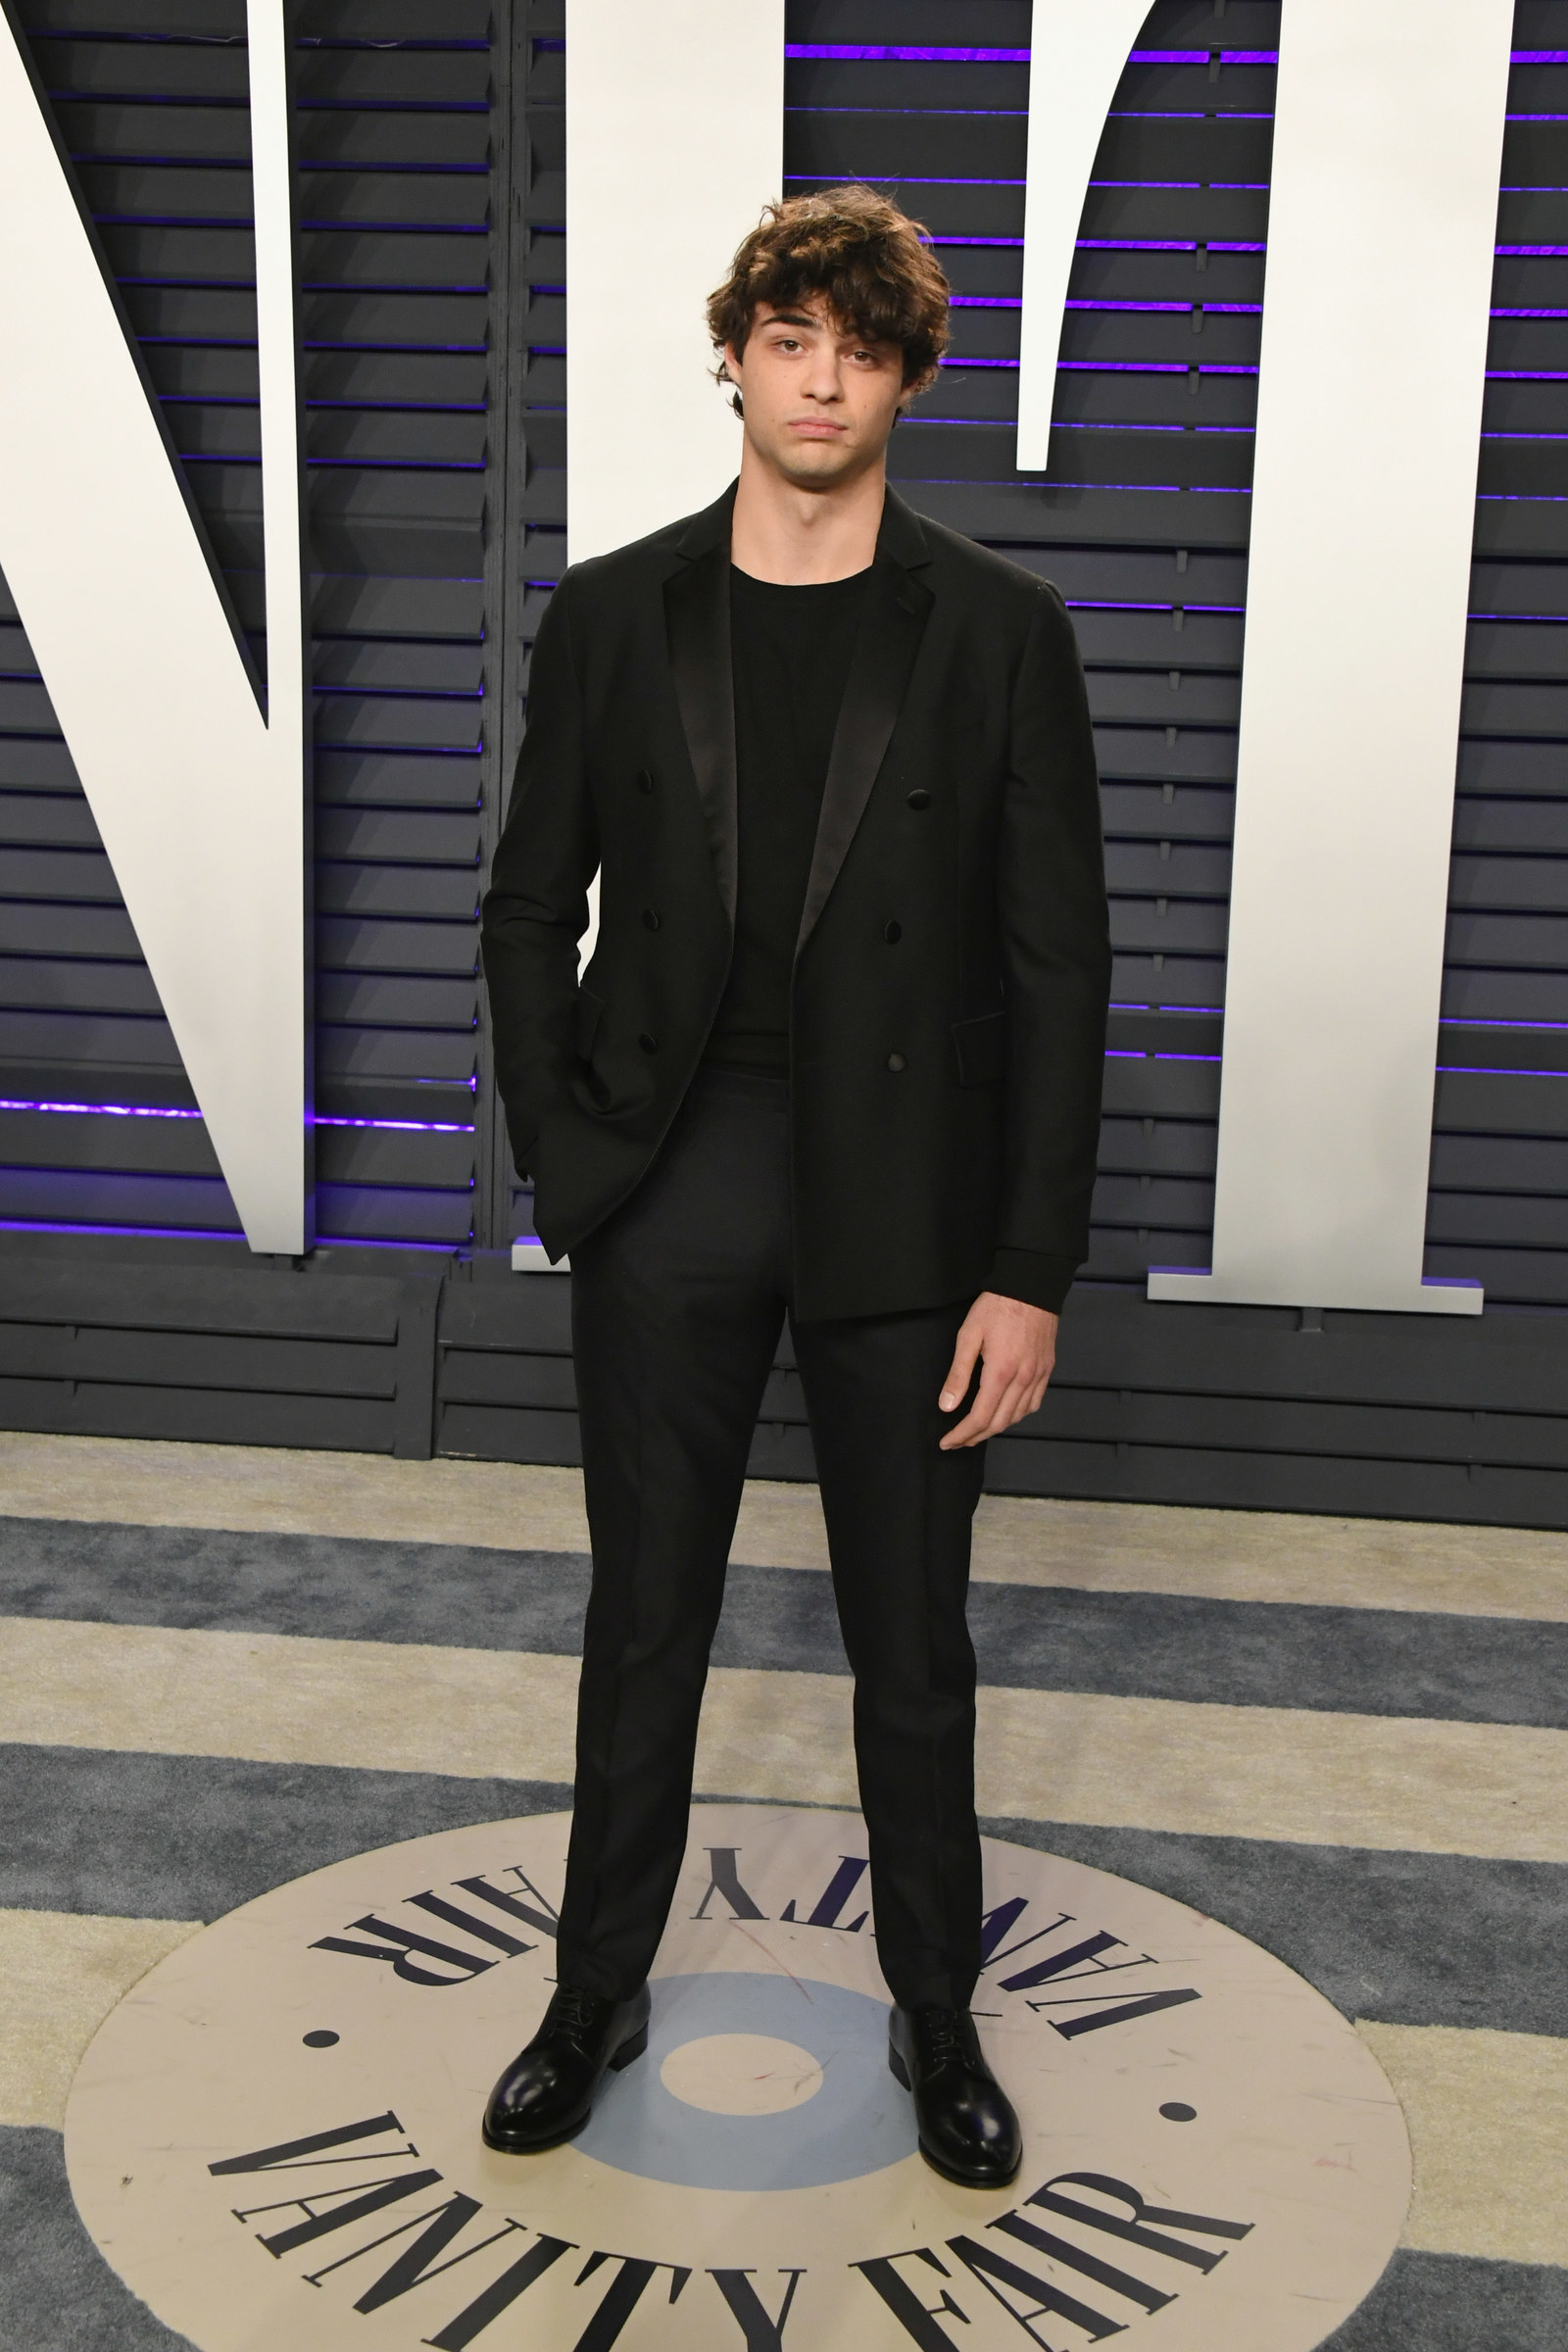 Here Are All The Looks From The 2019 Vanity Fair Oscar After Party1600 x 2400